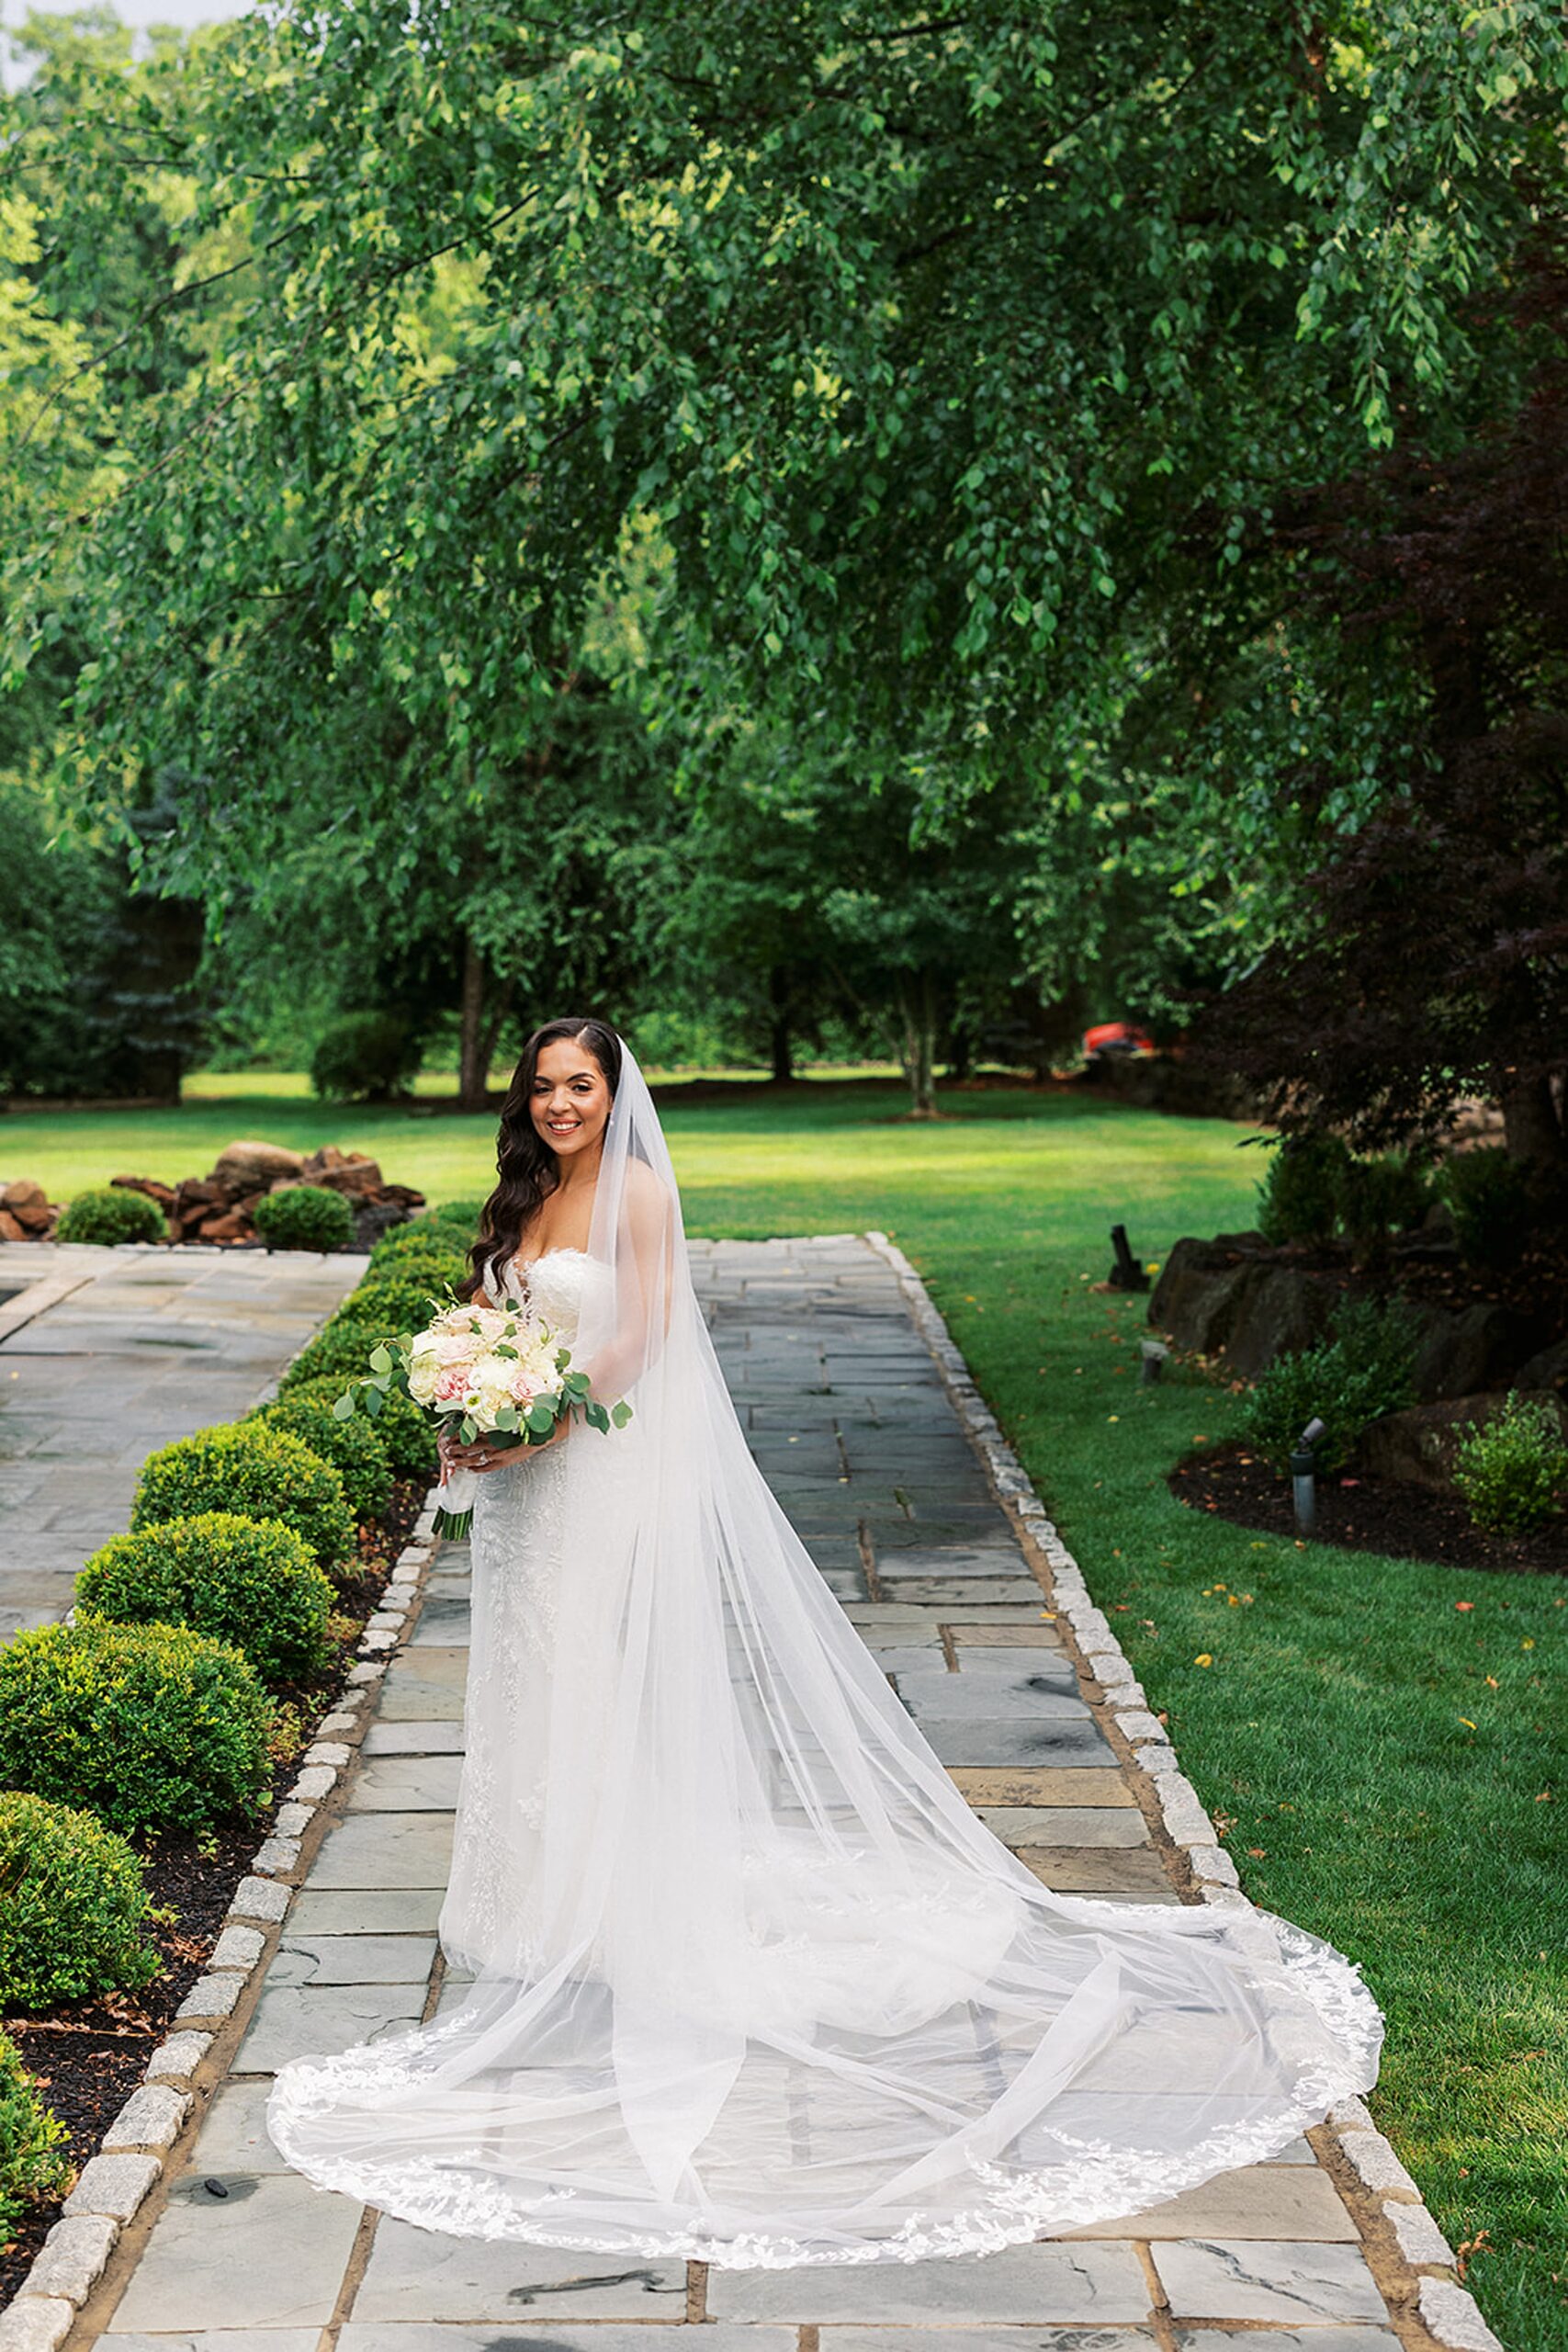 A bride stands in a stone garden path with her veil fully spread out